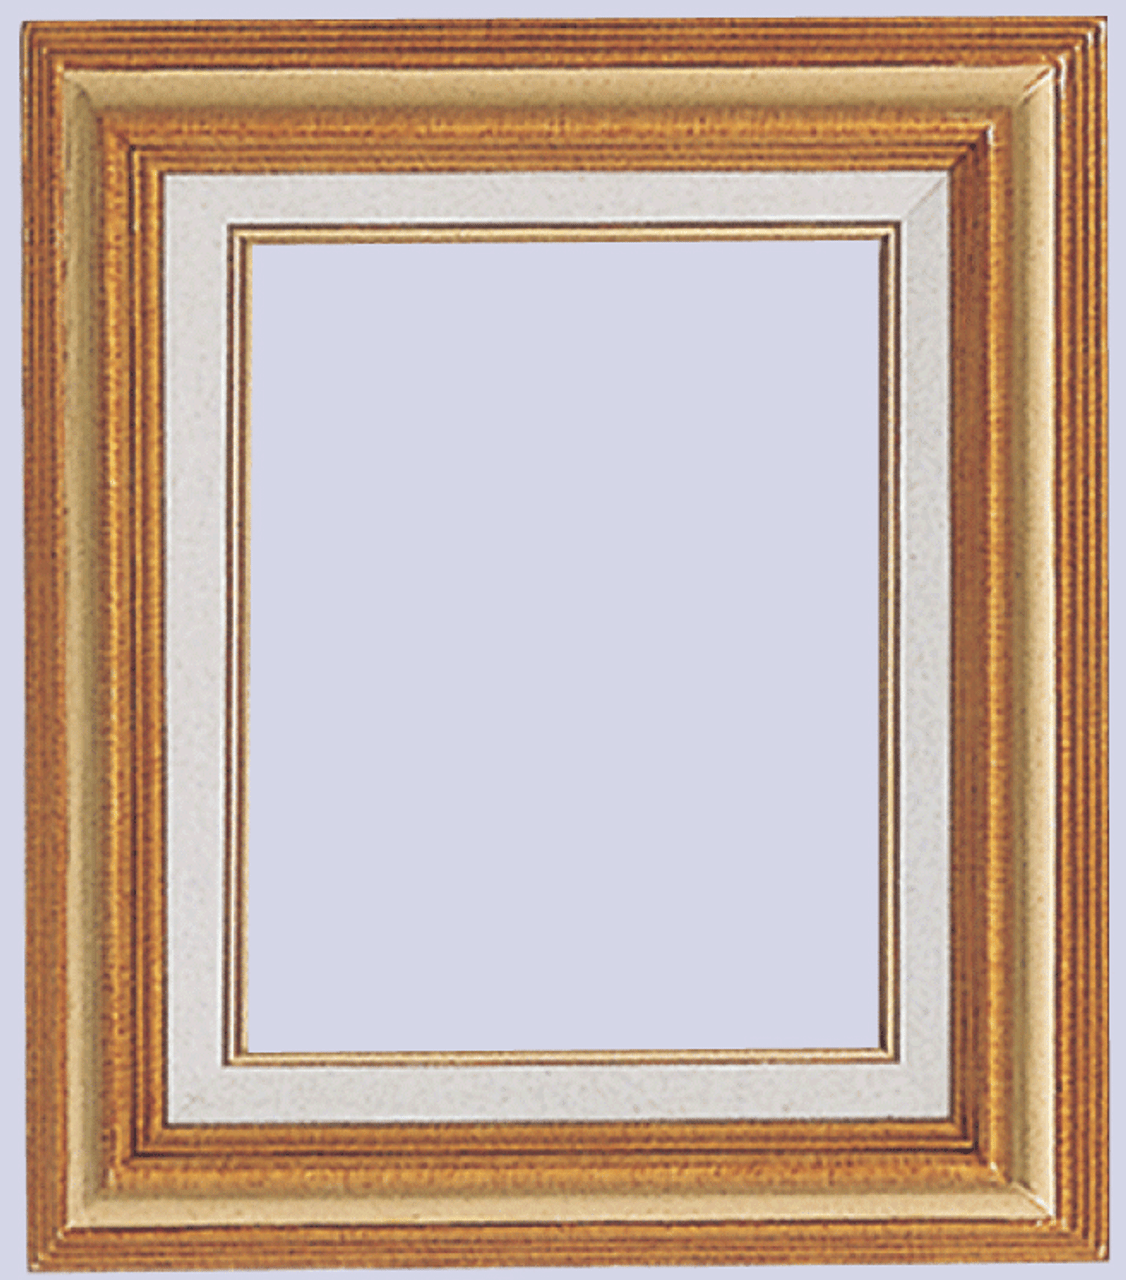 3 Inch Econo Wood Frames With Linen Liners: 12X17*